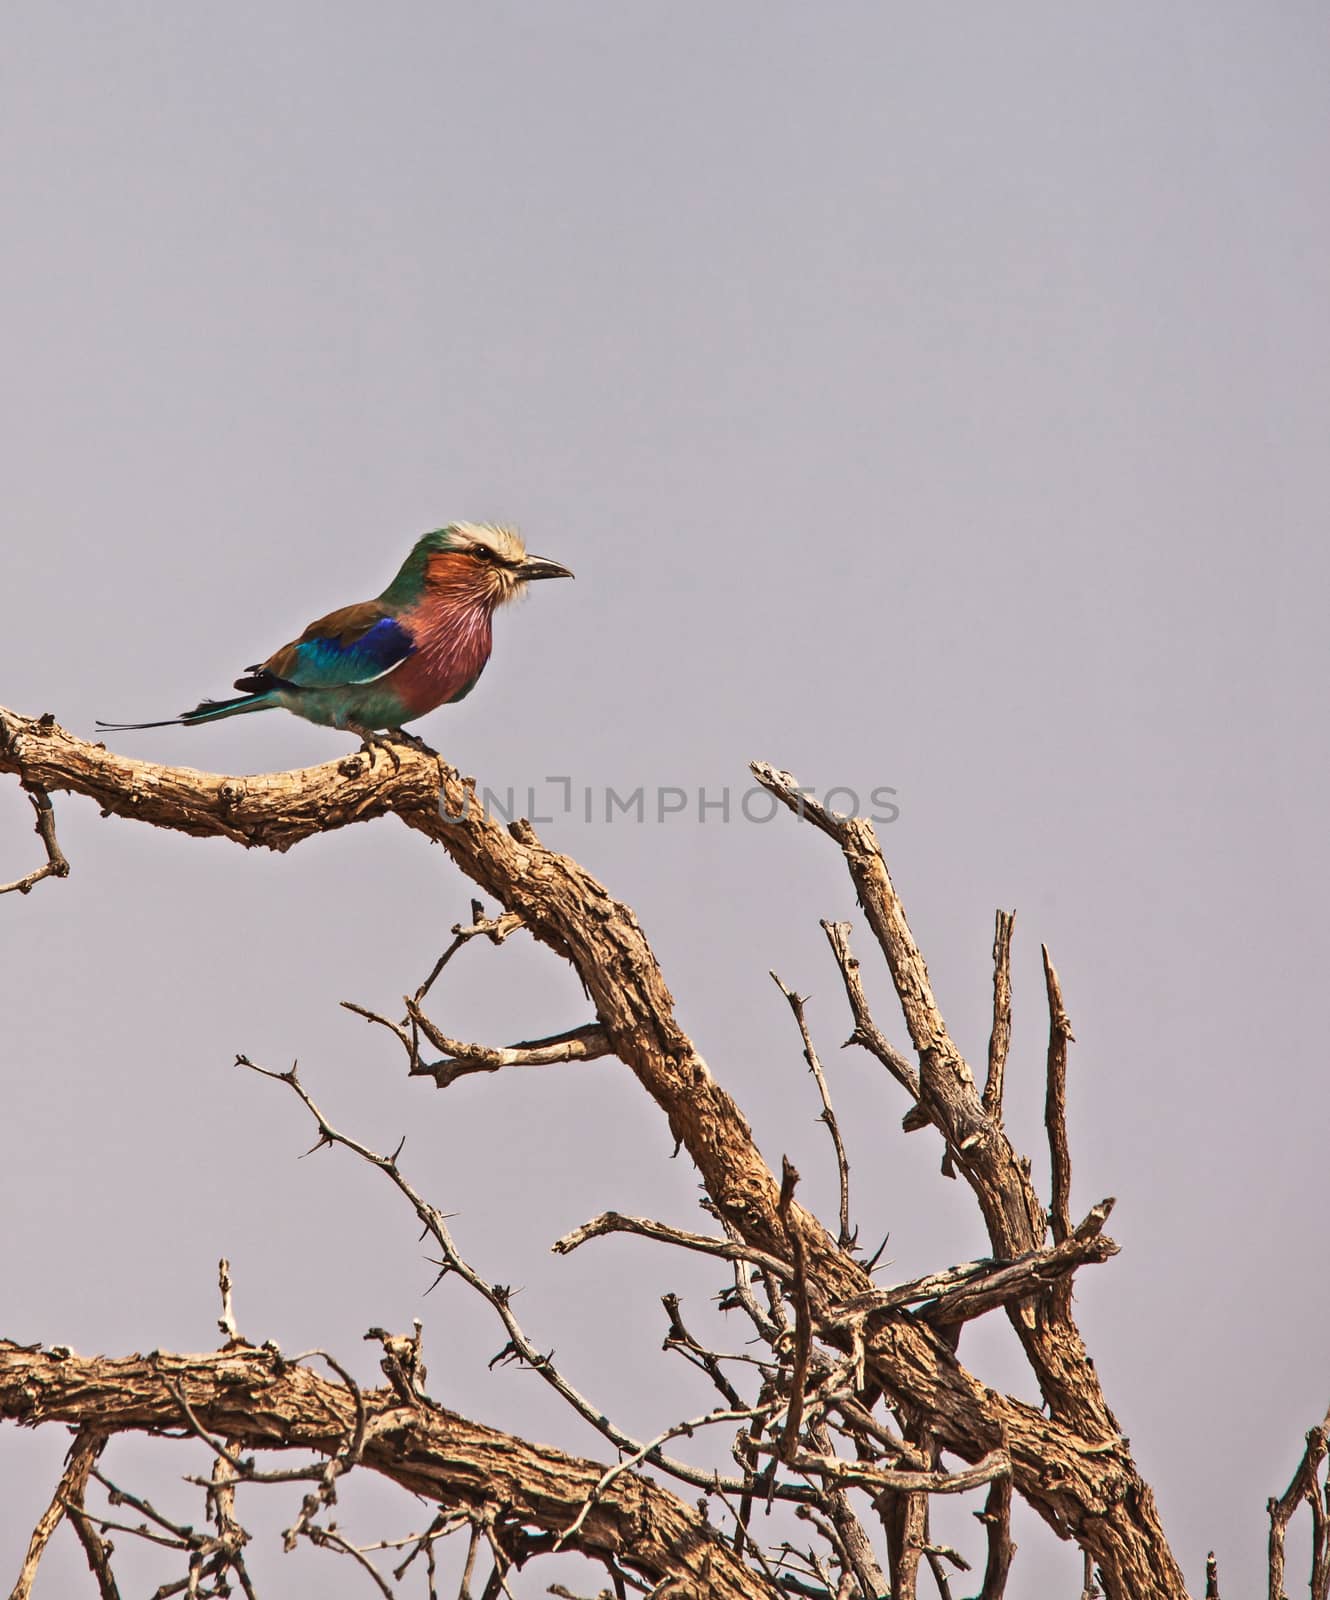 A single Lilac-breasted Roller (Coracias caudatus) perched on a dead branch in the Kgalagadi Trans Frontier Park. South Africa